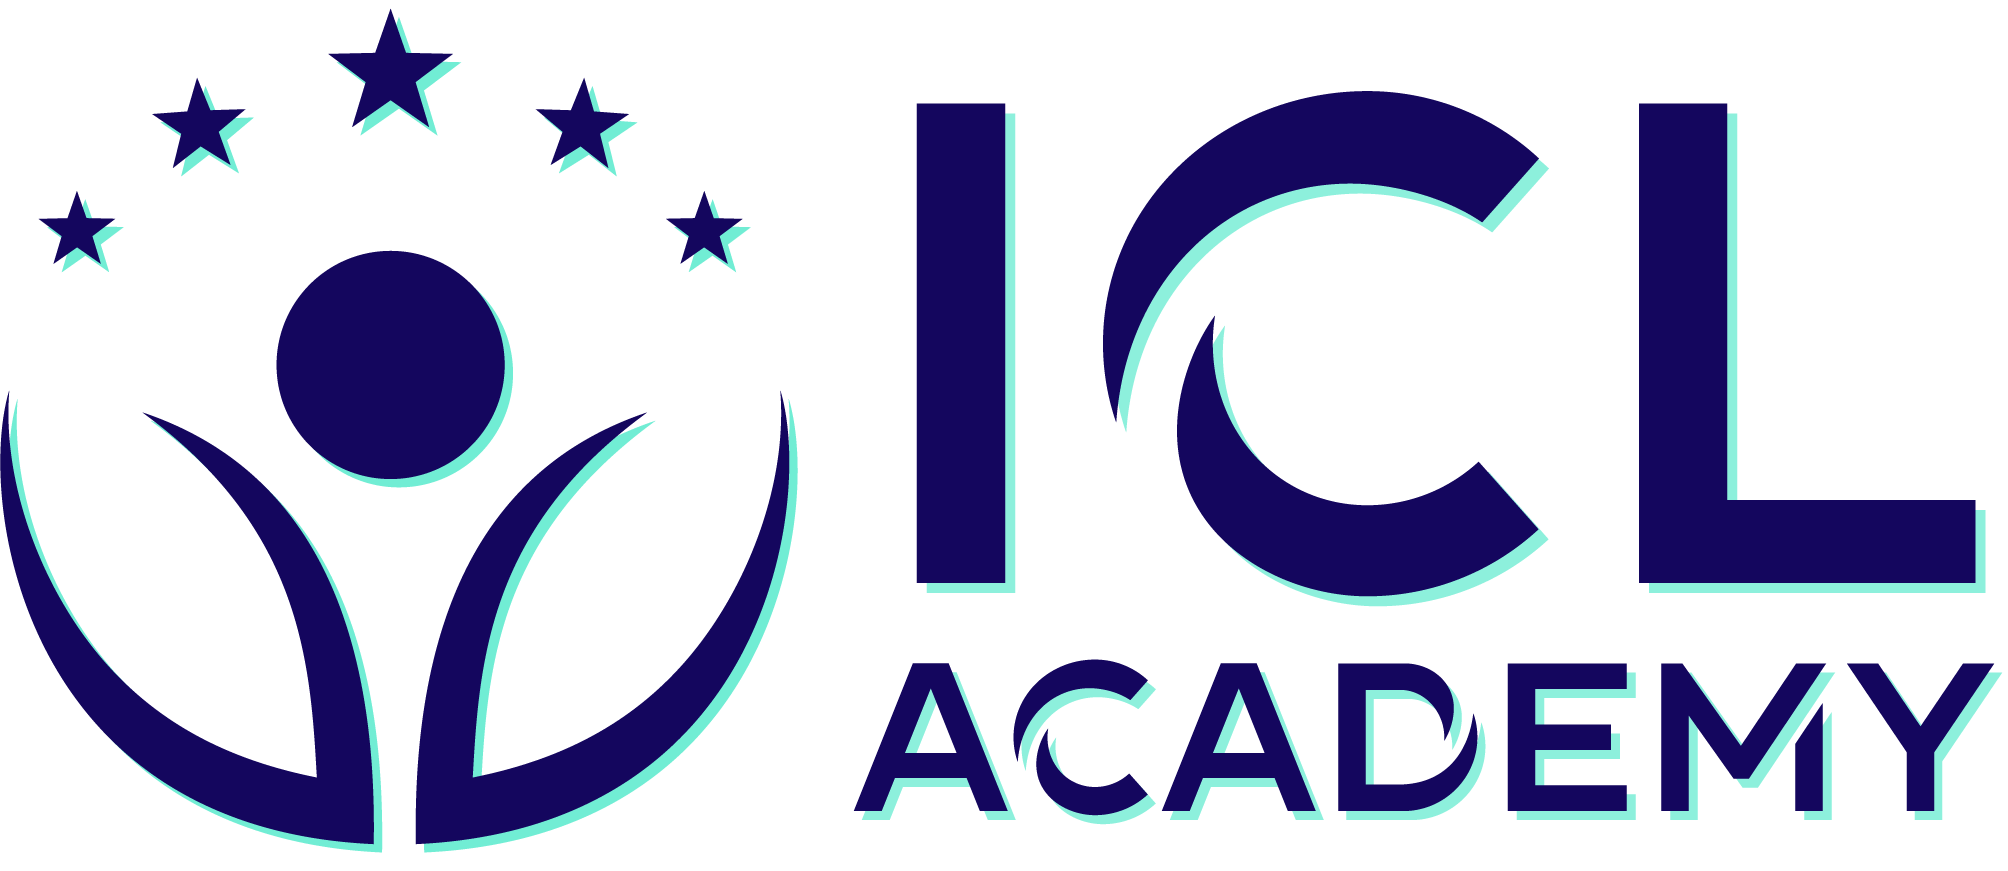 ICL-ACADEMY-LOGO-No-Text.png